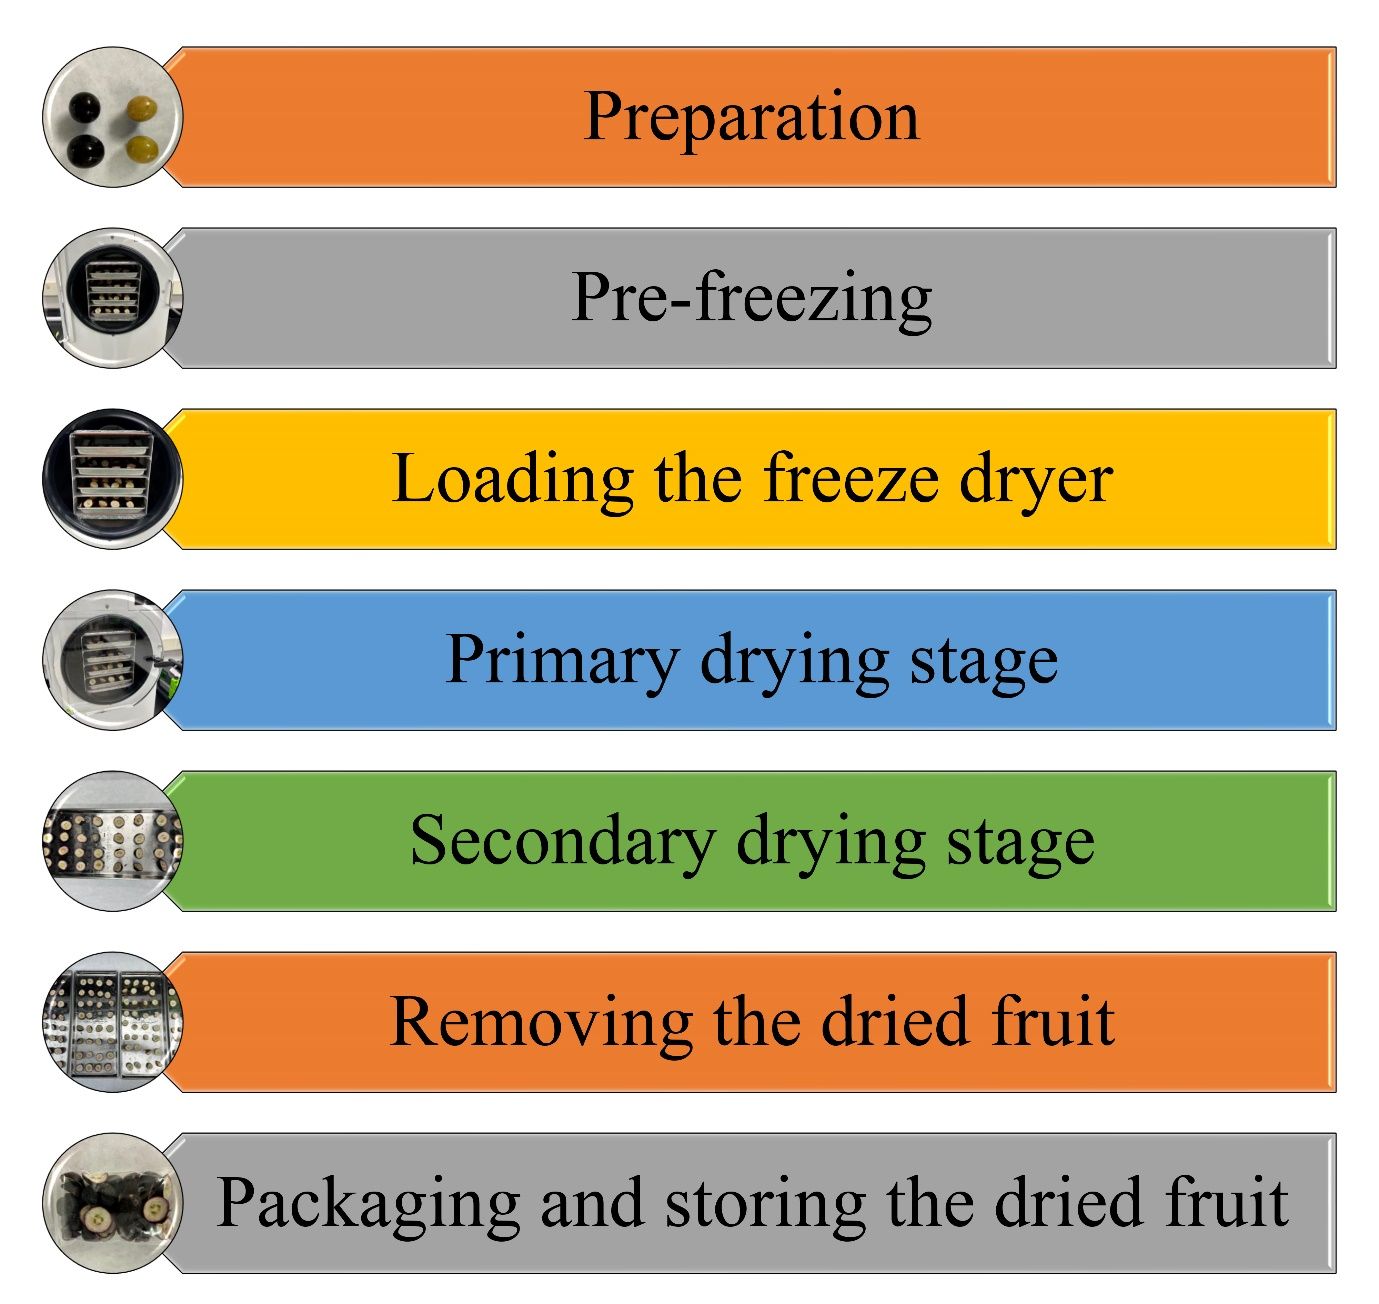 A flowchart diagram showing the steps involved in the freeze-drying process for muscadine fruit.